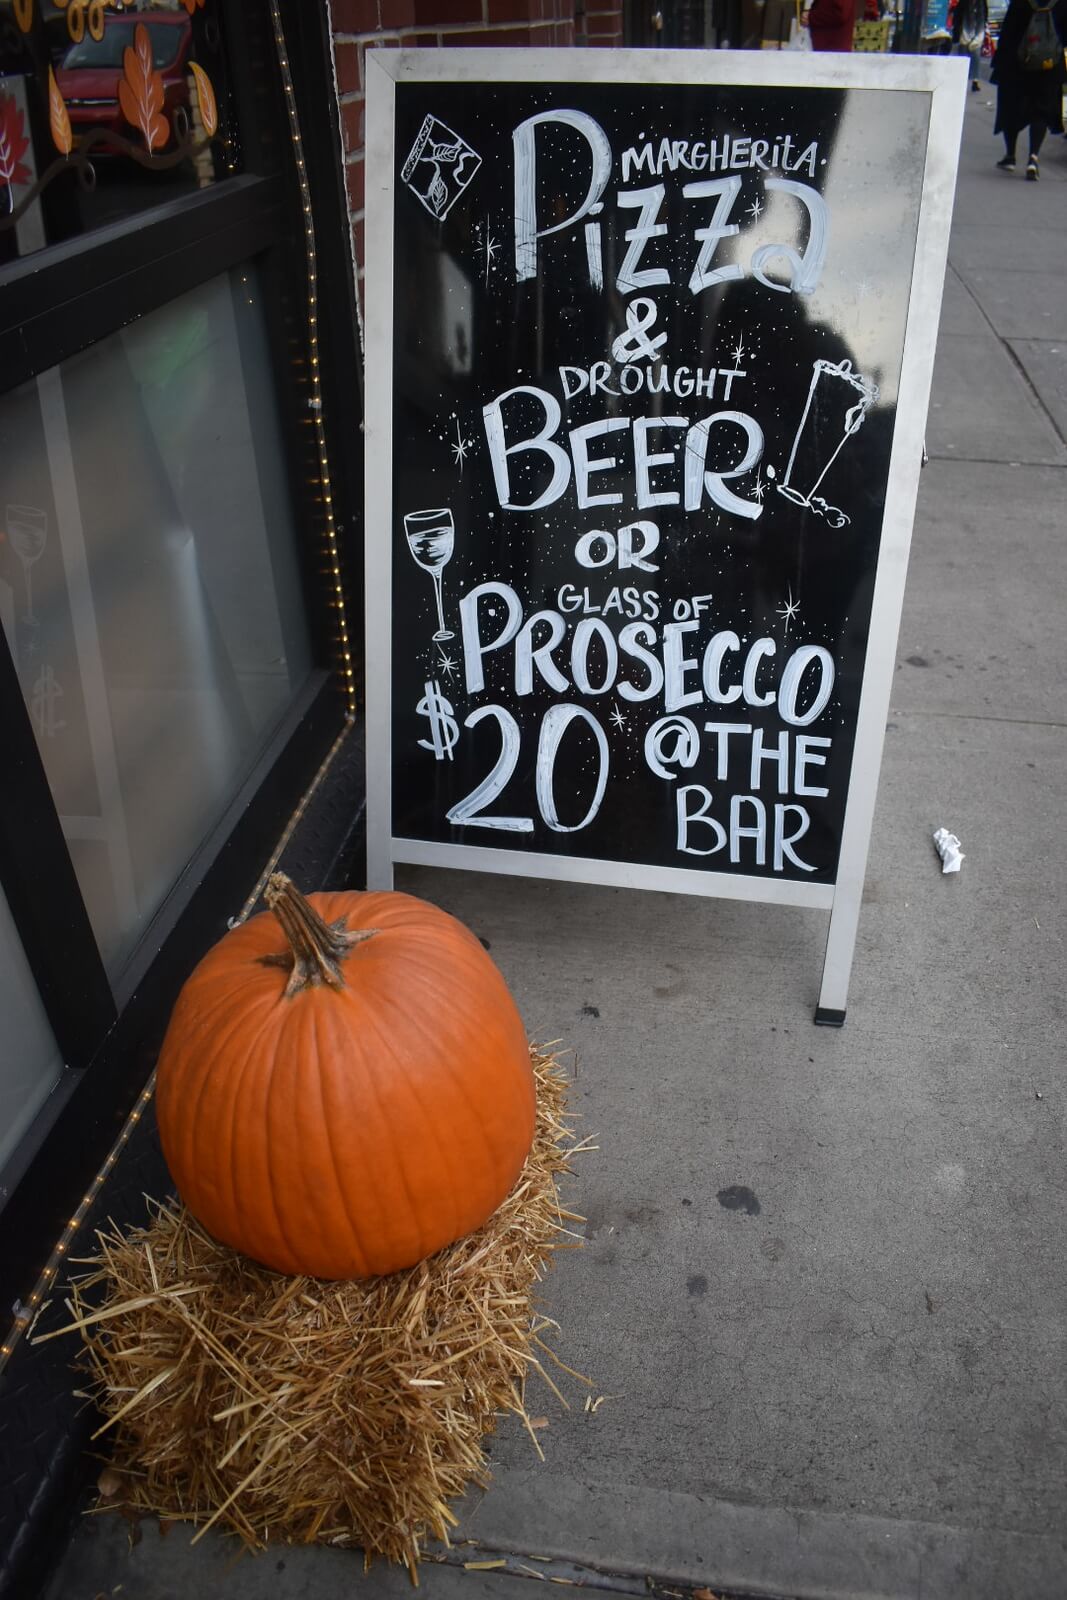 Sidewalk sign that says 'Pizza and Beer or Prosecca $20 at the bar' with a pumpkin in front of it